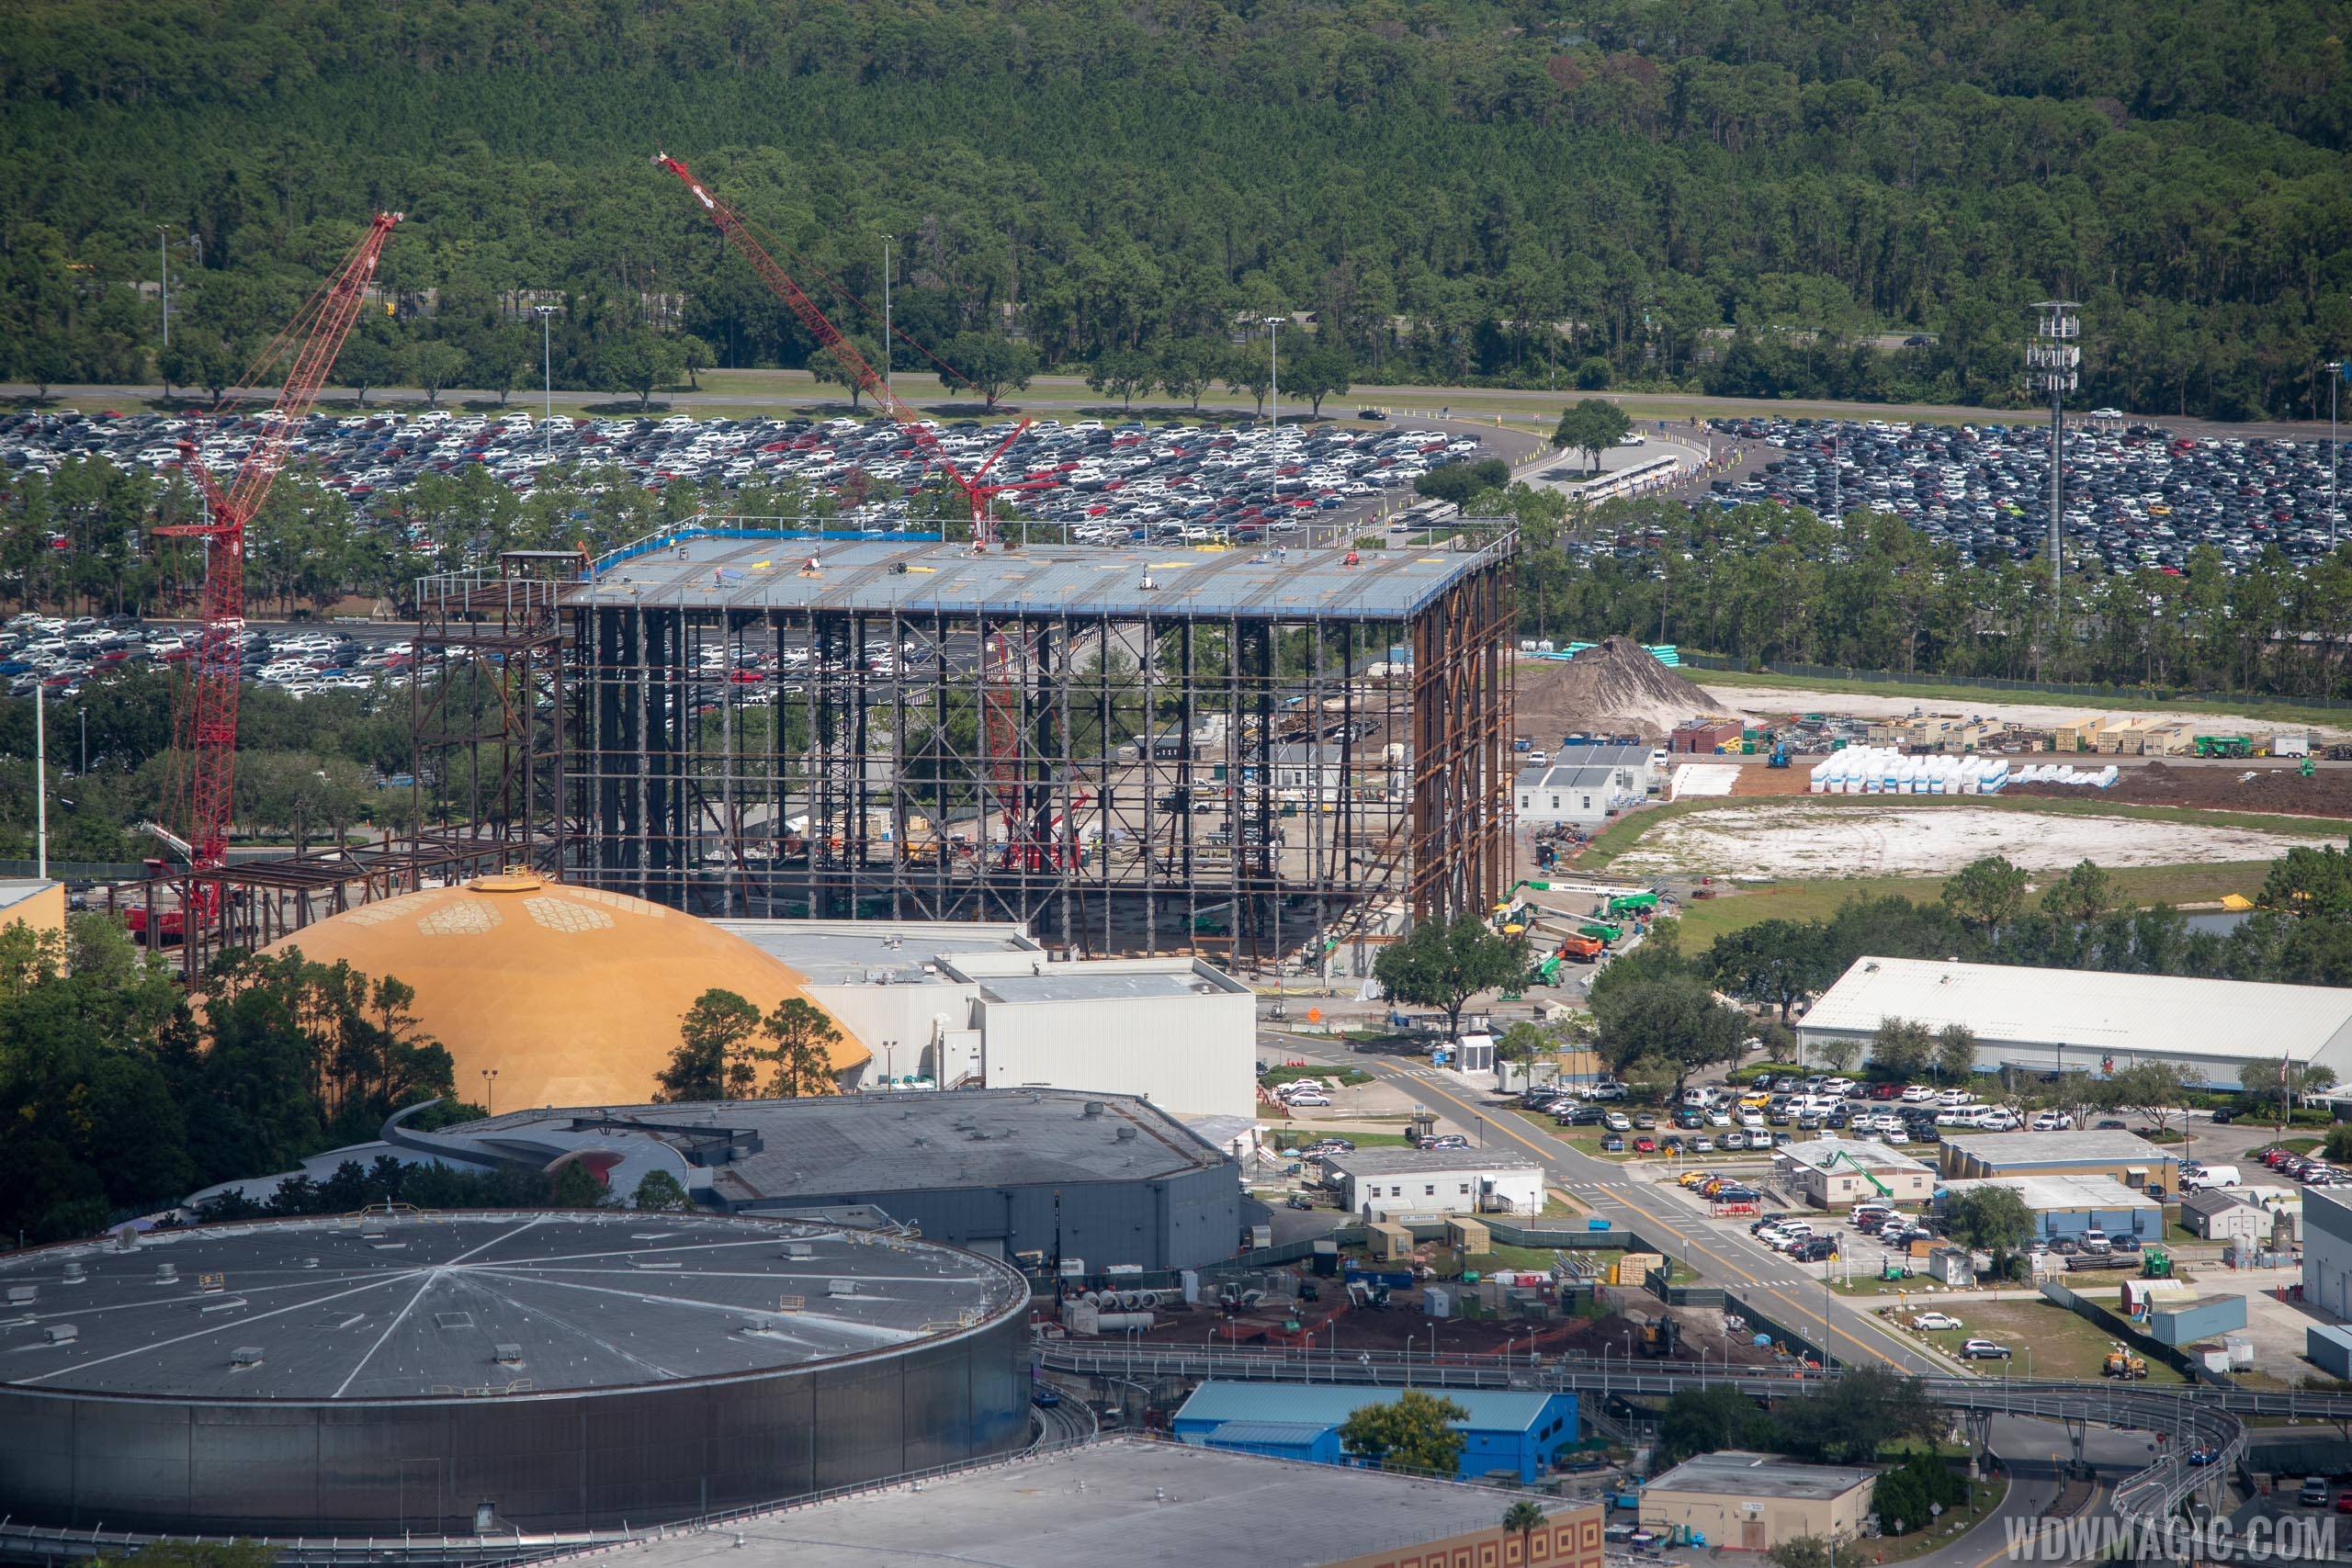 PHOTOS - Aerial views of Epcot's Guardians of the Galaxy coaster under construction